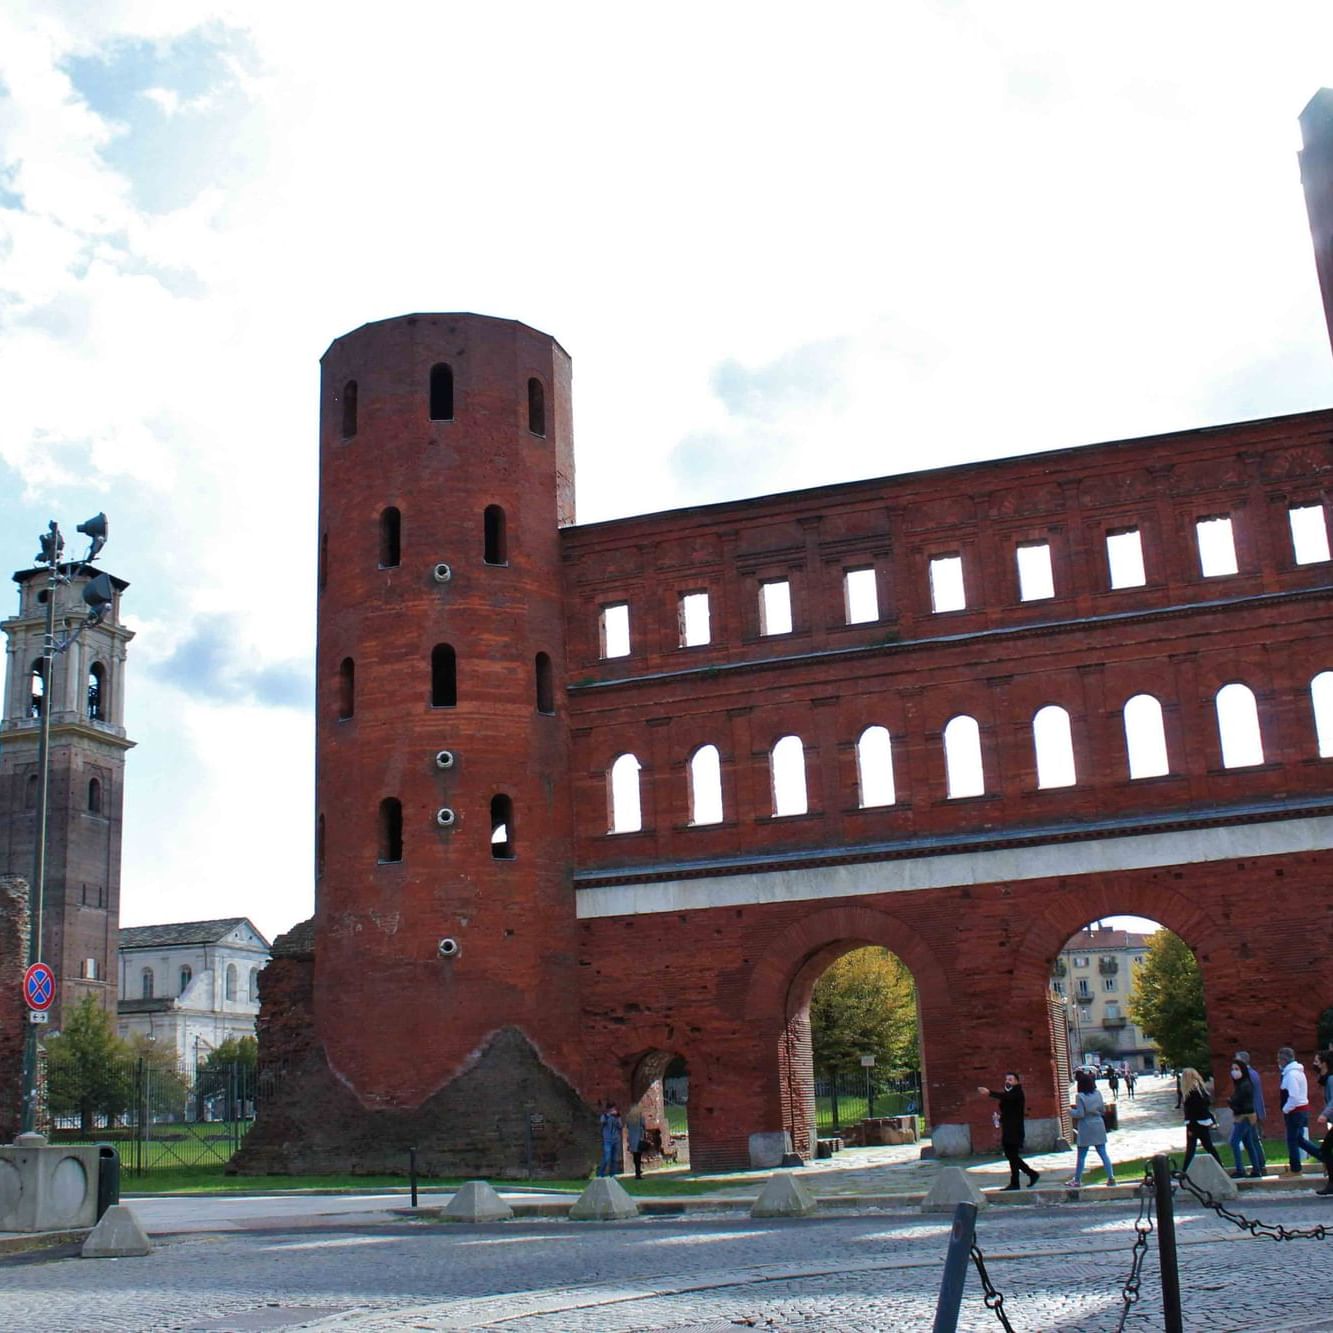 Things to see in Turin, Porte Palatine